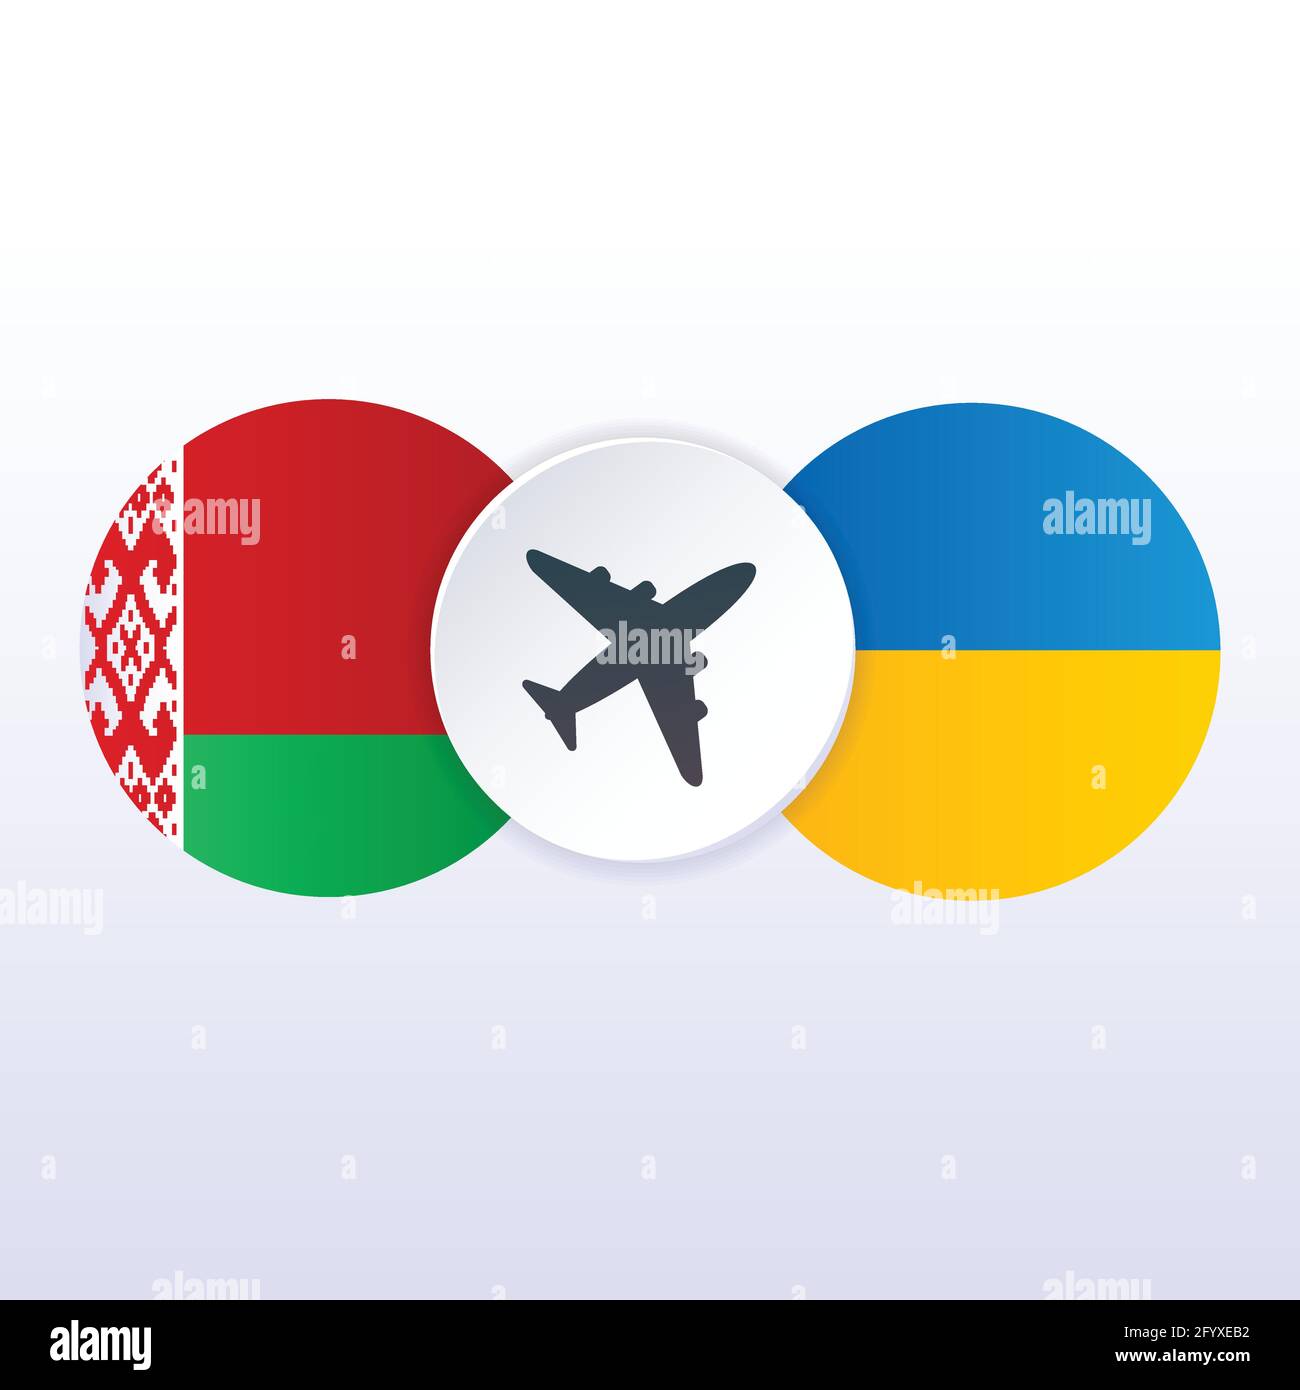 Closure airspace of Ukraine and Belarus vector illustration. Tariff trade war crisis, relations, cooperation strategy. Concept for web page, banner, p Stock Vector